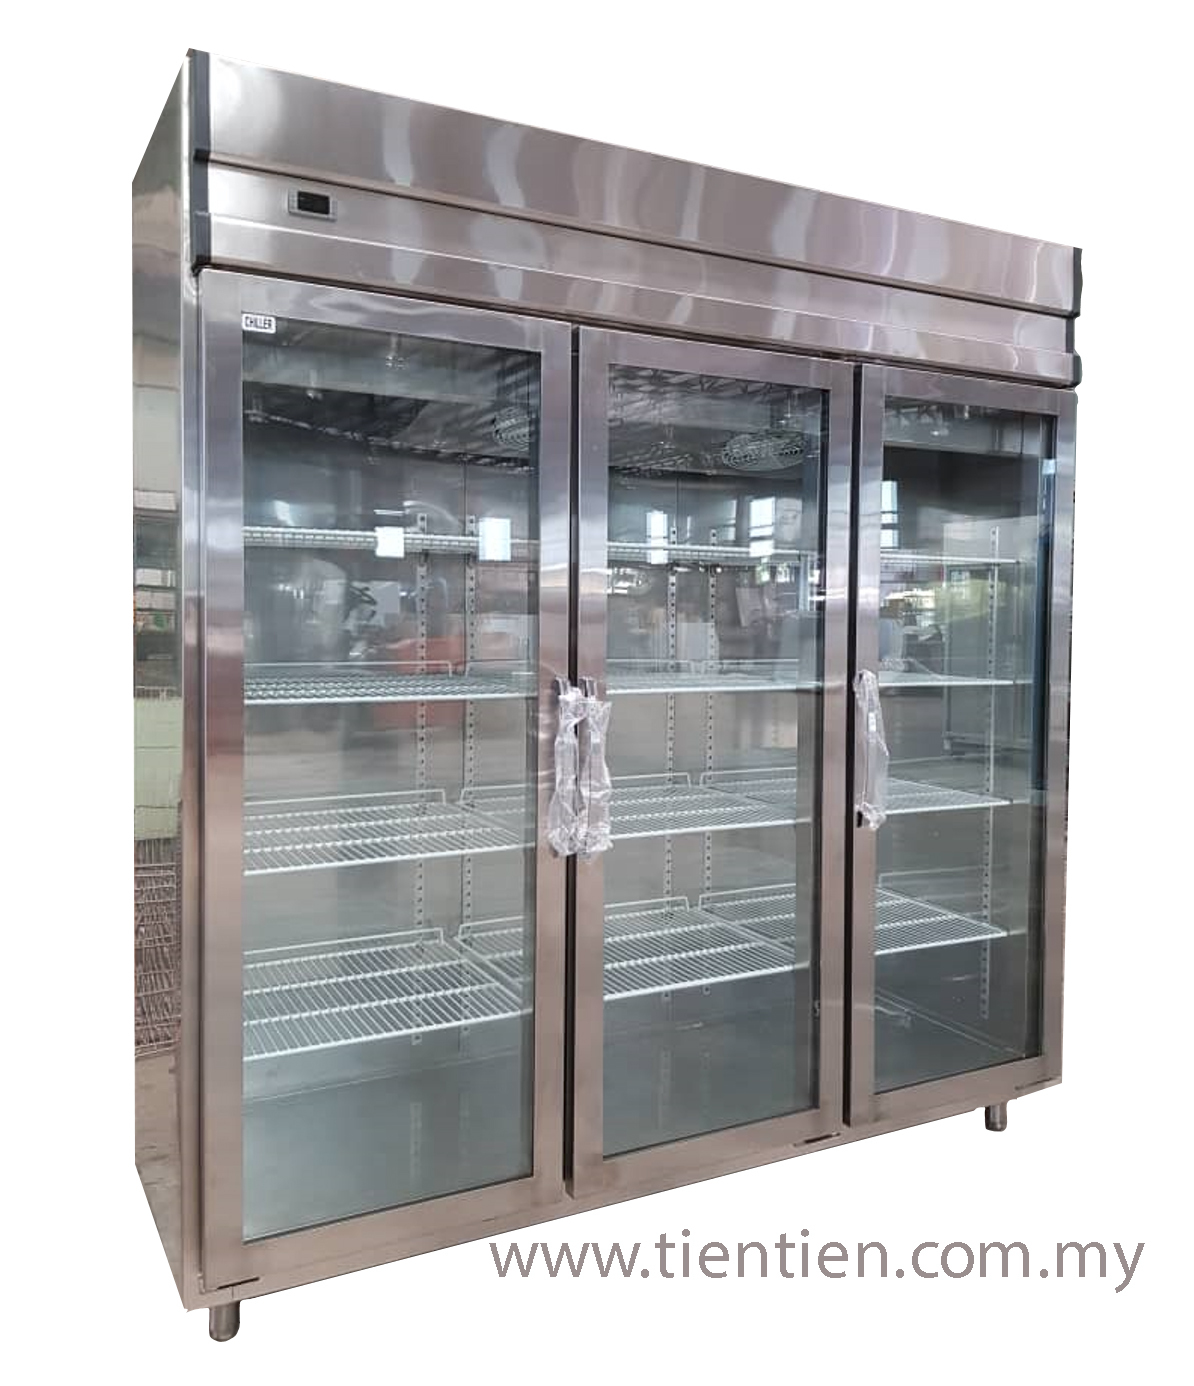 Open Showcase Refrigerators and Display Chillers in Malaysia